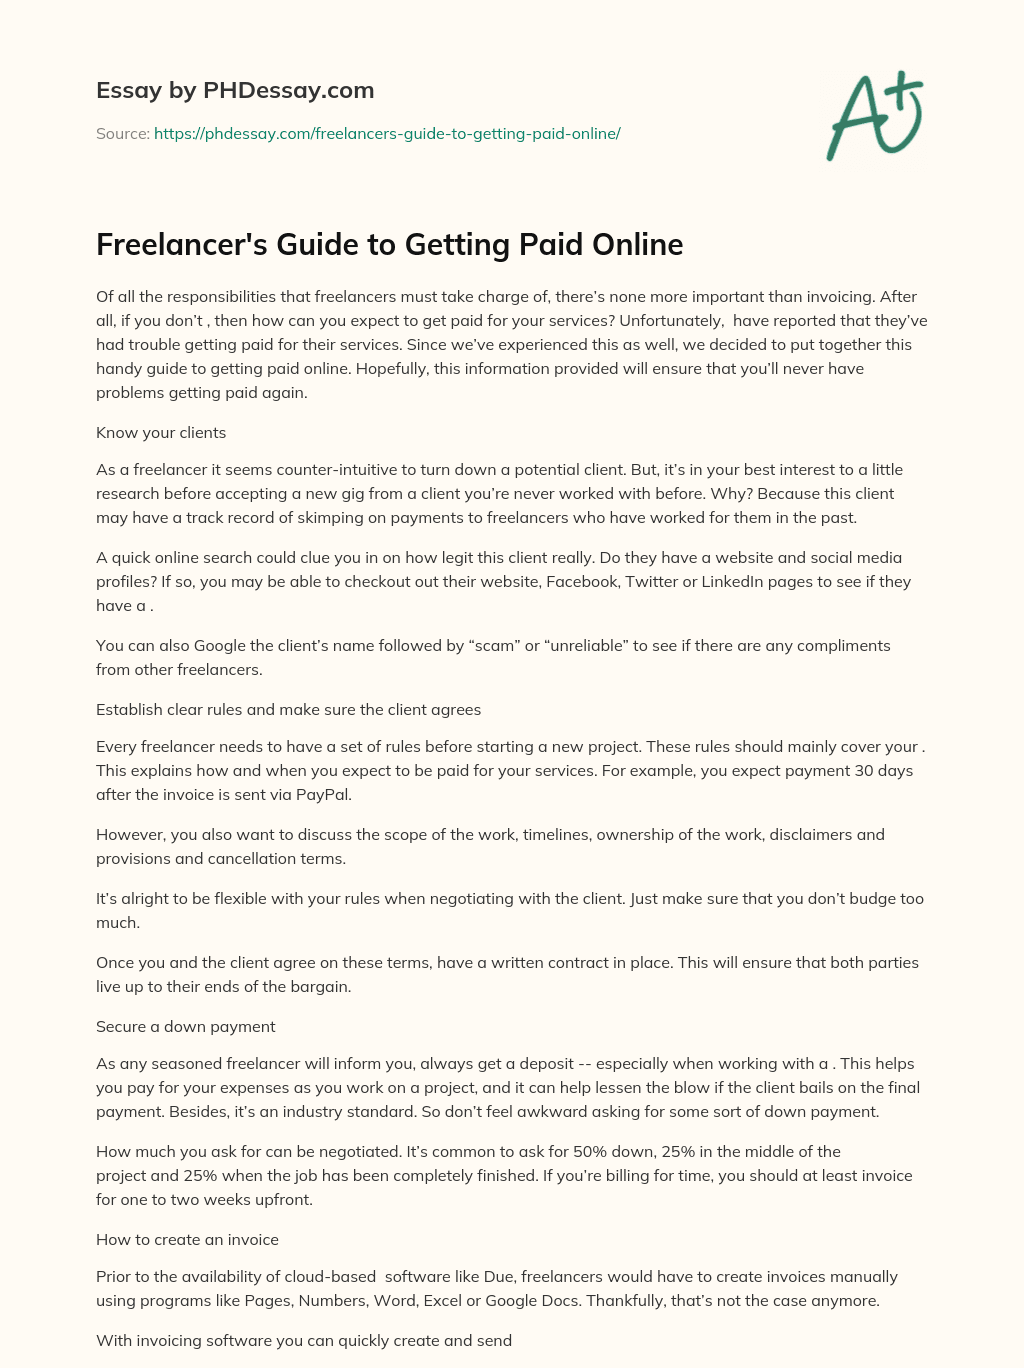 Freelancer’s Guide to Getting Paid Online essay